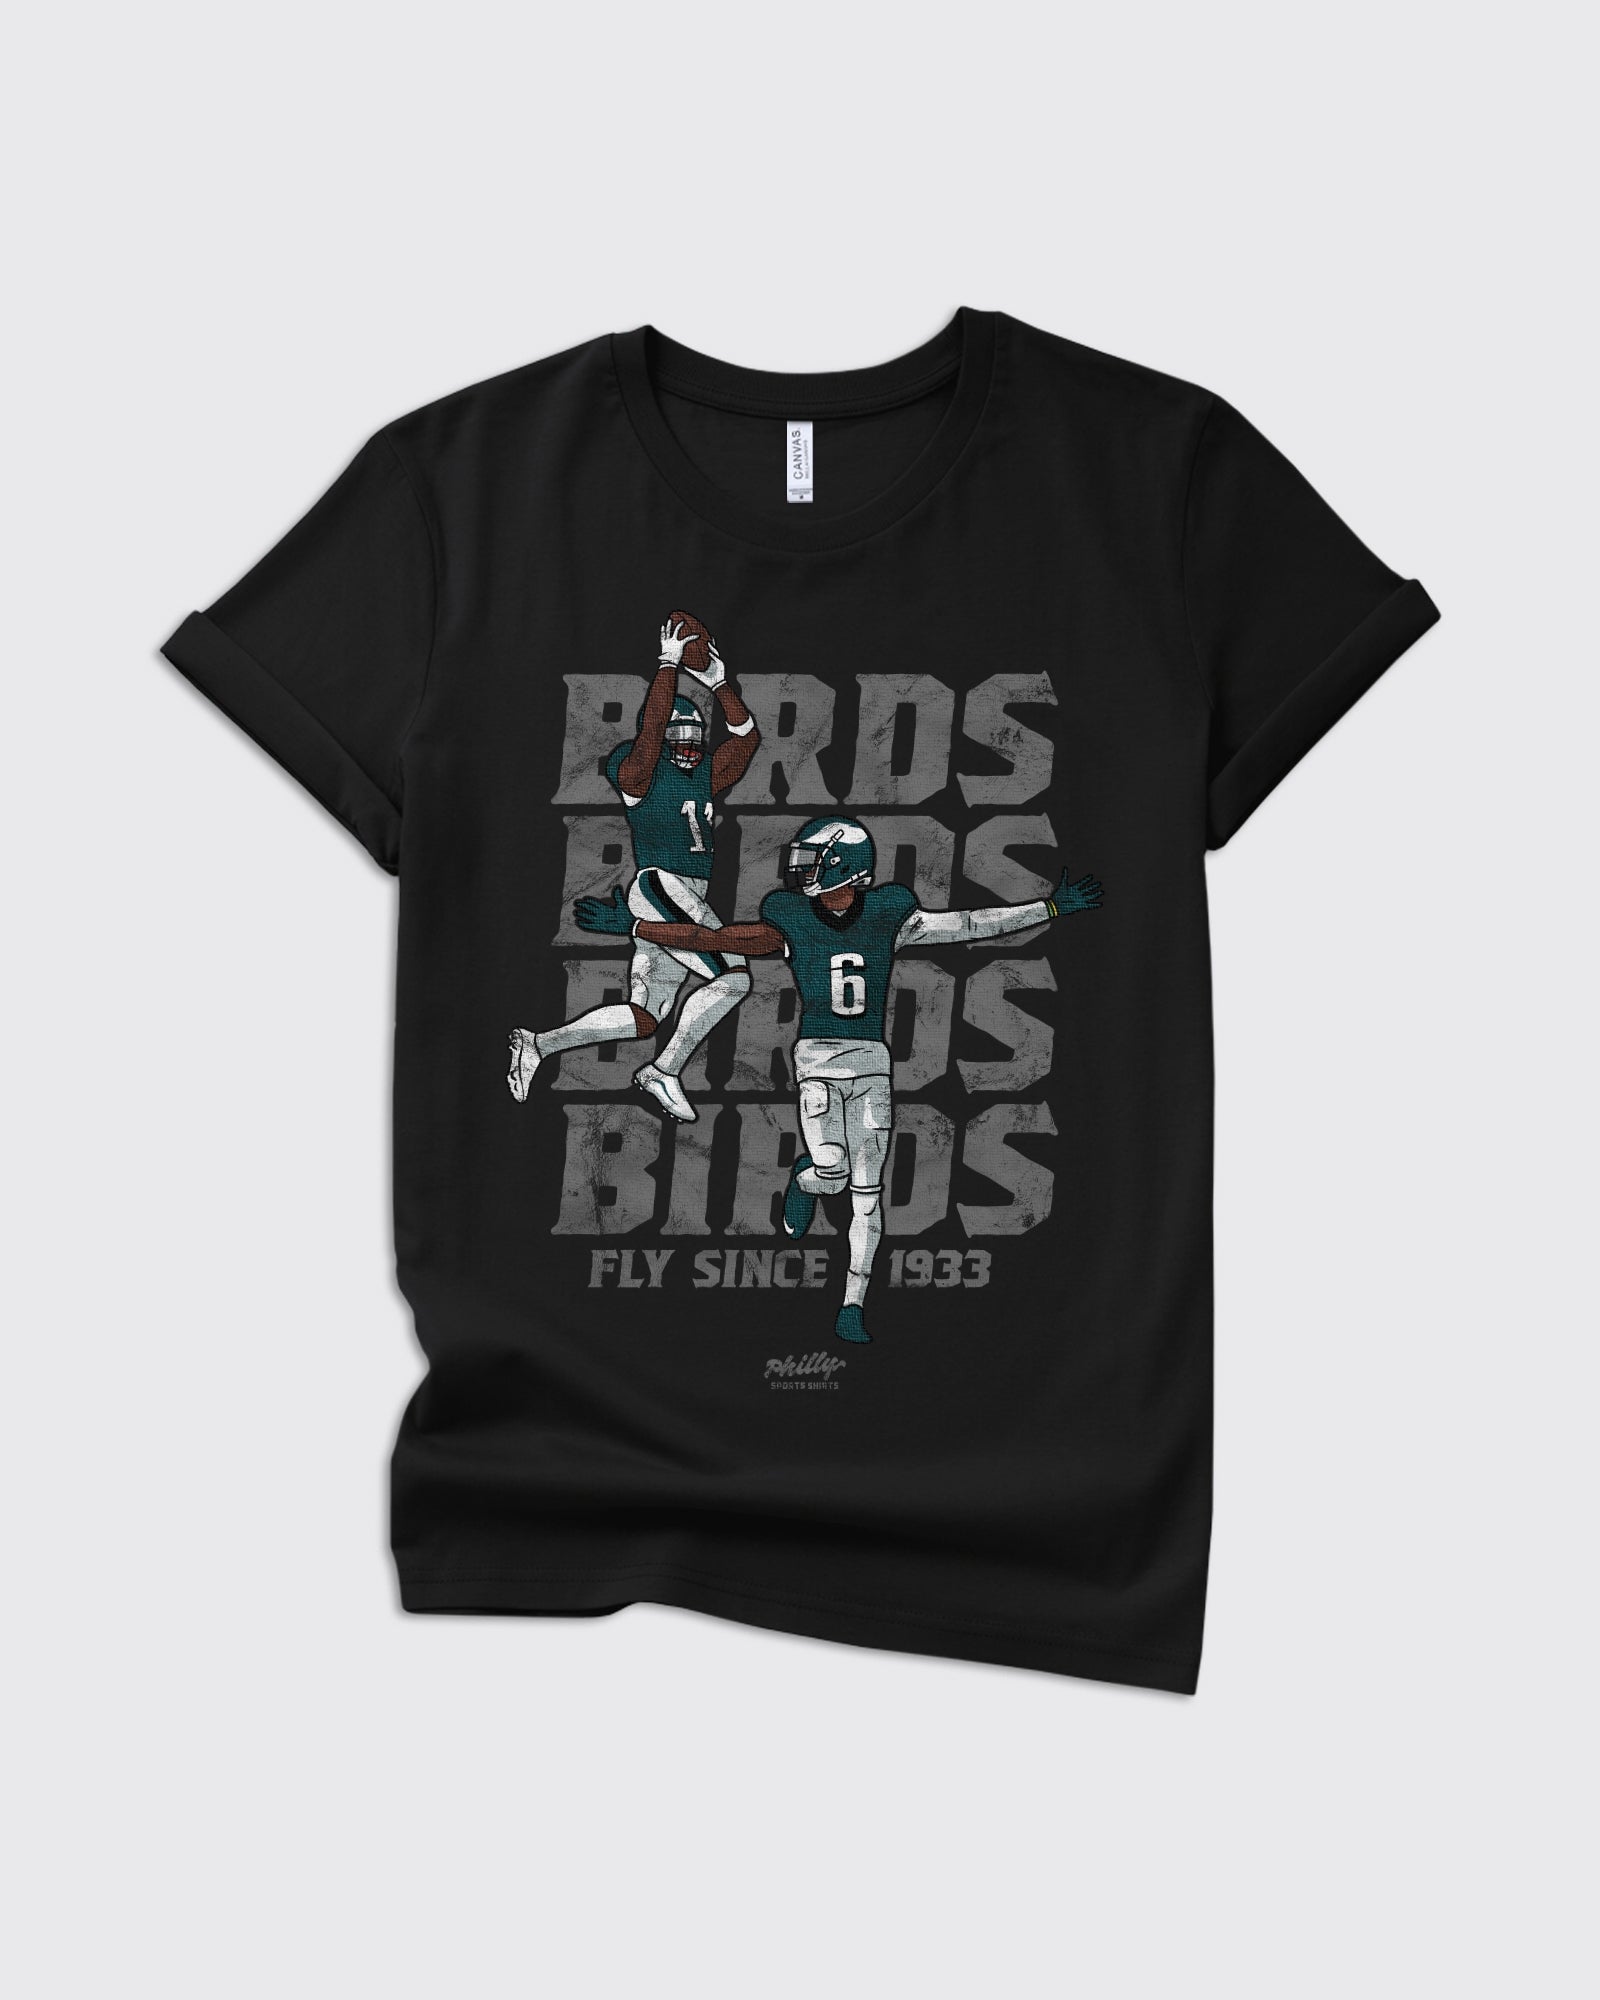 Kids Touchdown Celly Shirt - Eagles, Kids, T-Shirts - Philly Sports Shirts